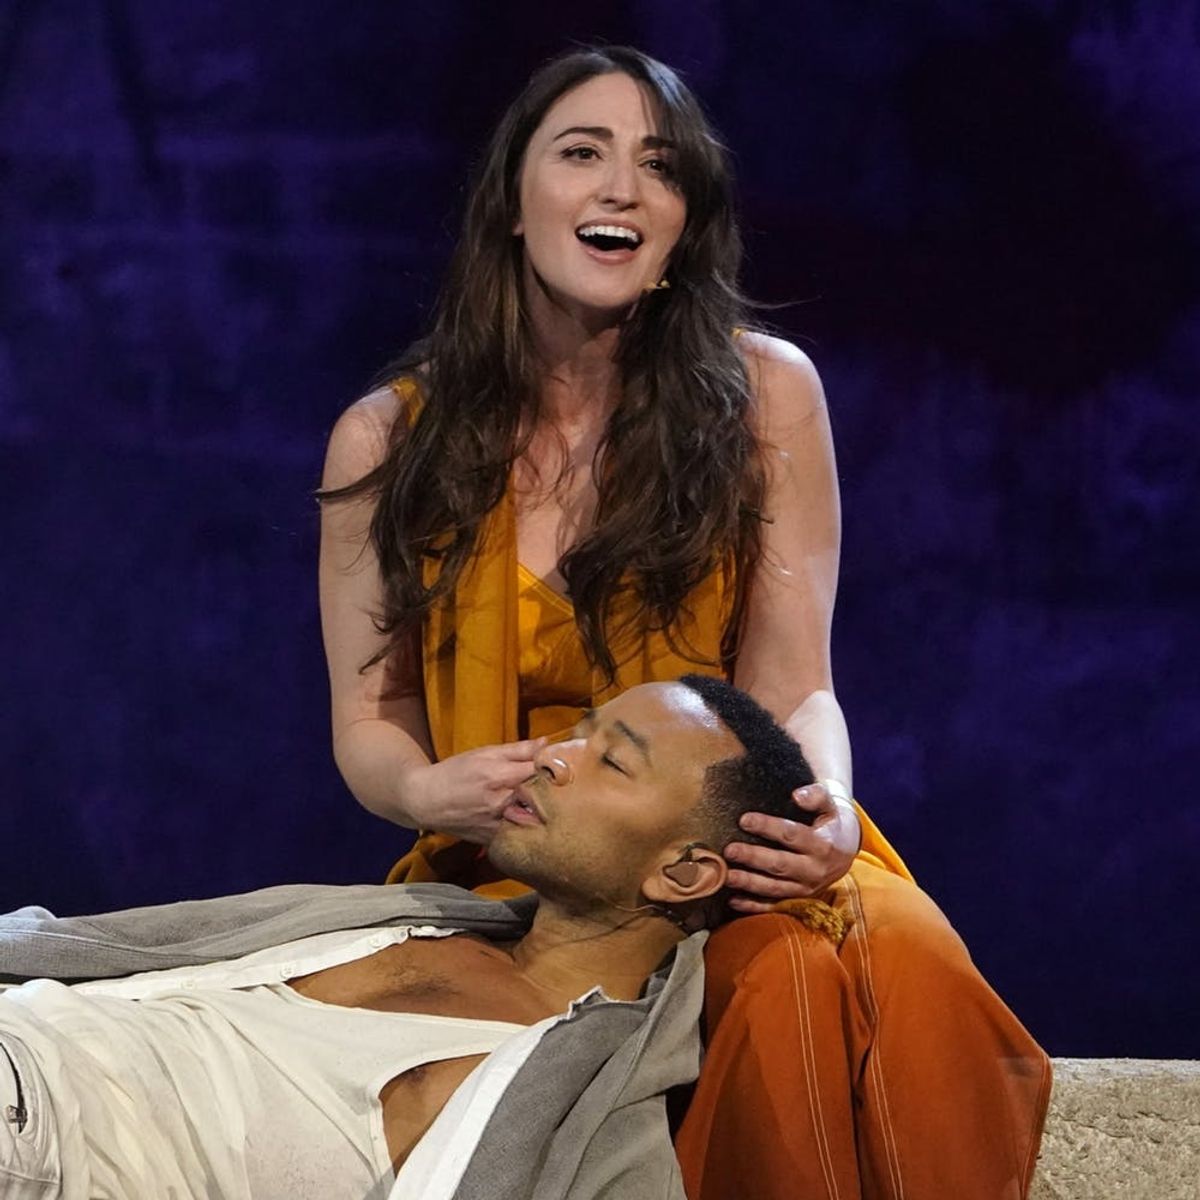 The 9 Best Moments from NBC’s ‘Jesus Christ Superstar Live in Concert’